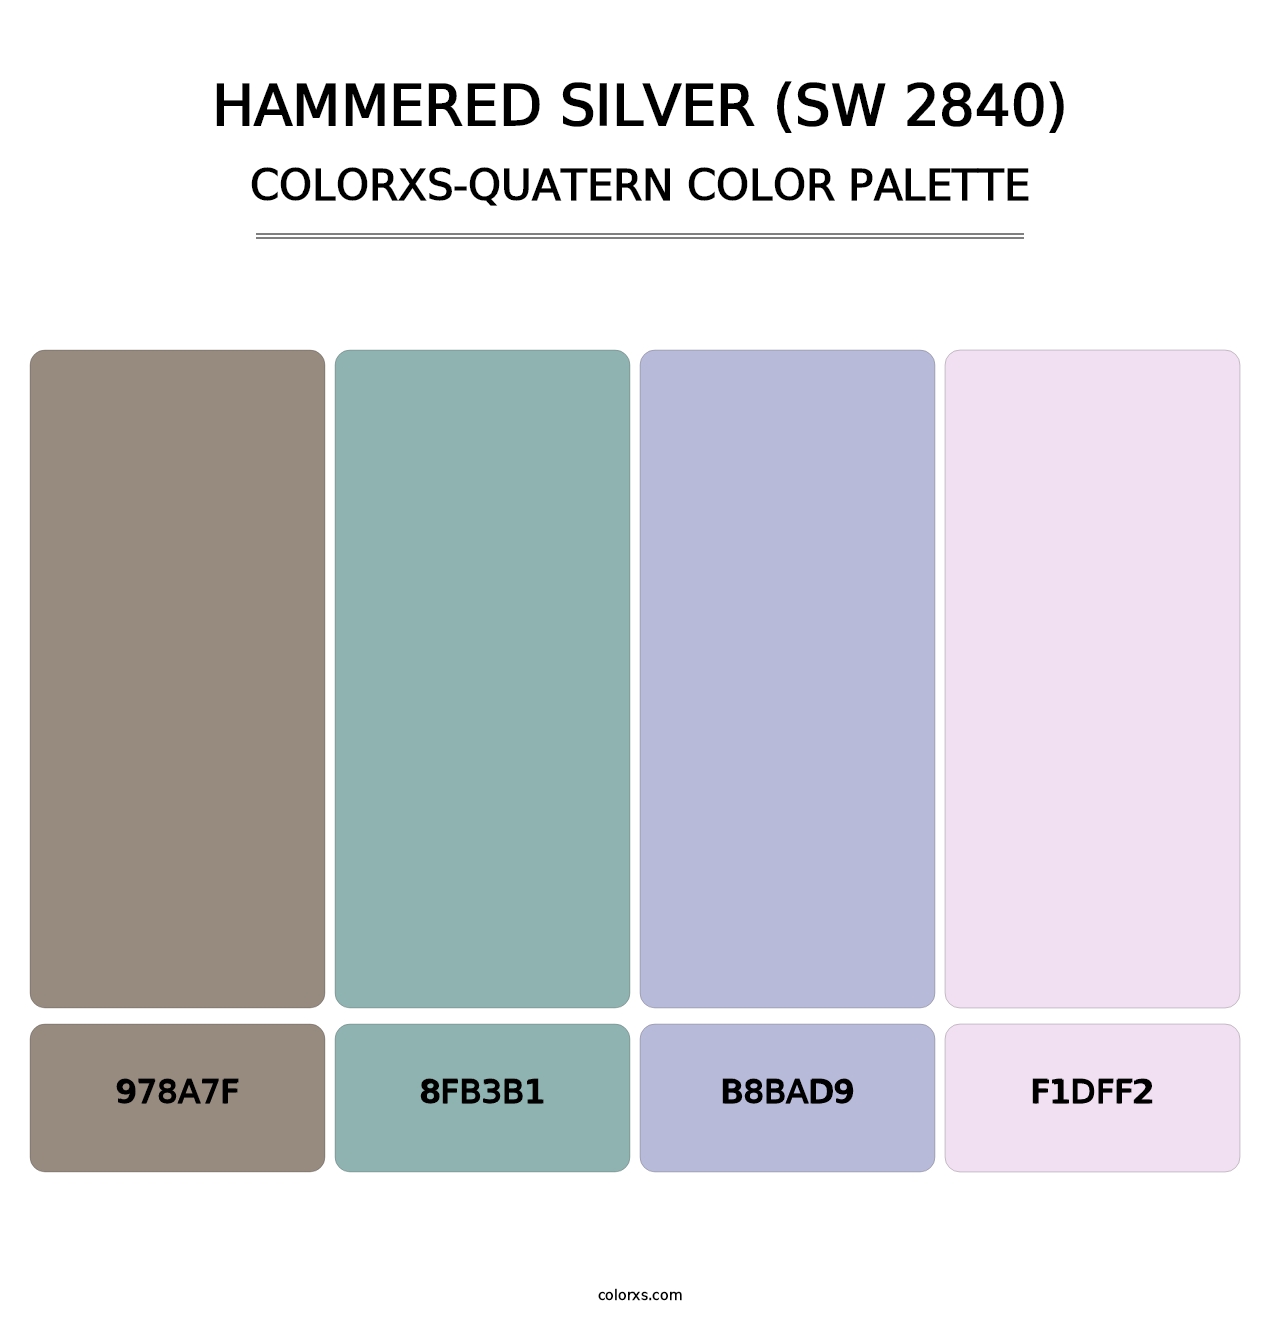 Hammered Silver (SW 2840) - Colorxs Quatern Palette